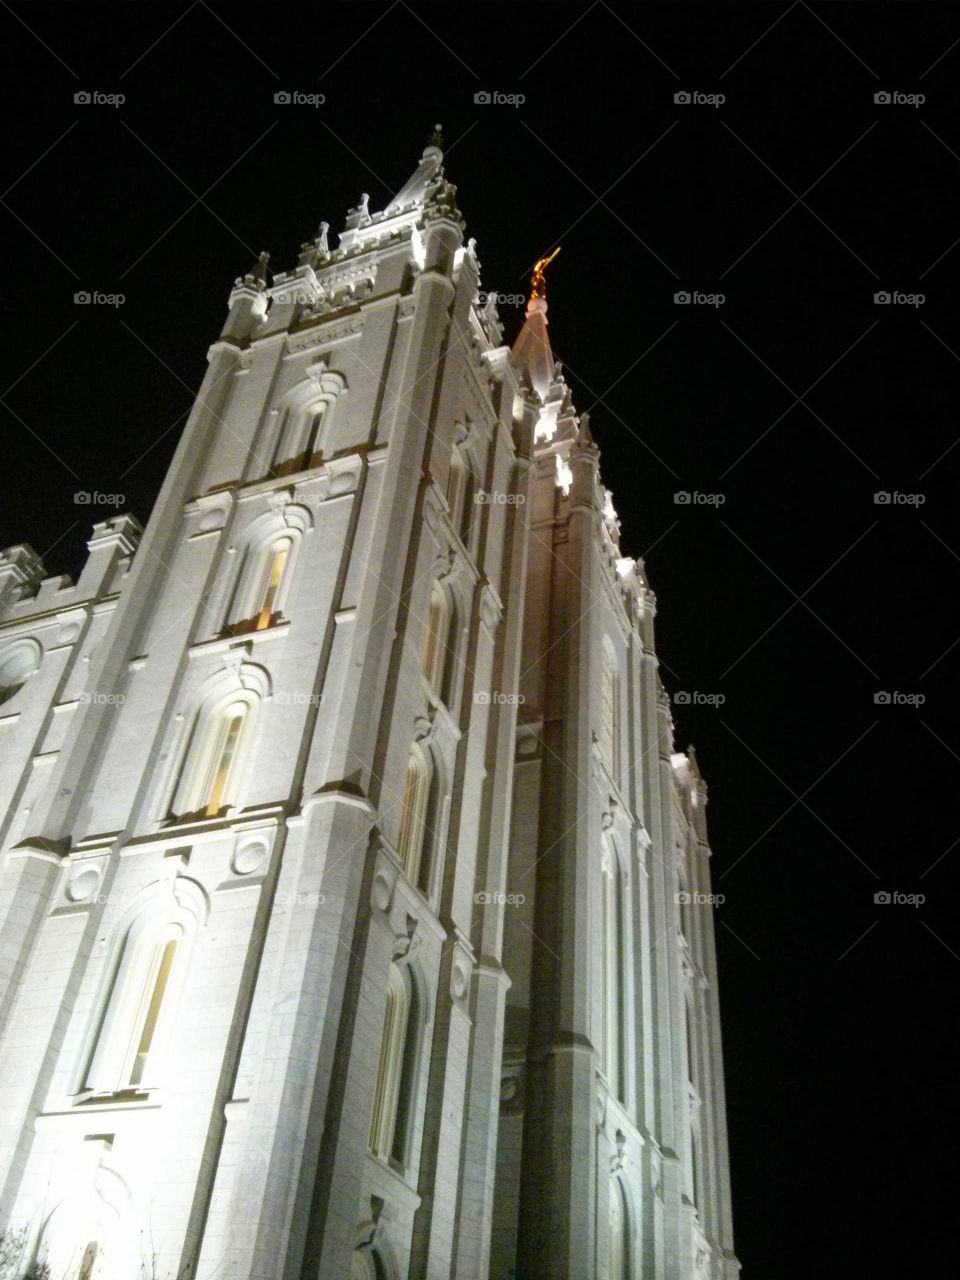 looking up at the temple. the view from the base of the LDS (Mormon) temple in salt lake city Utah